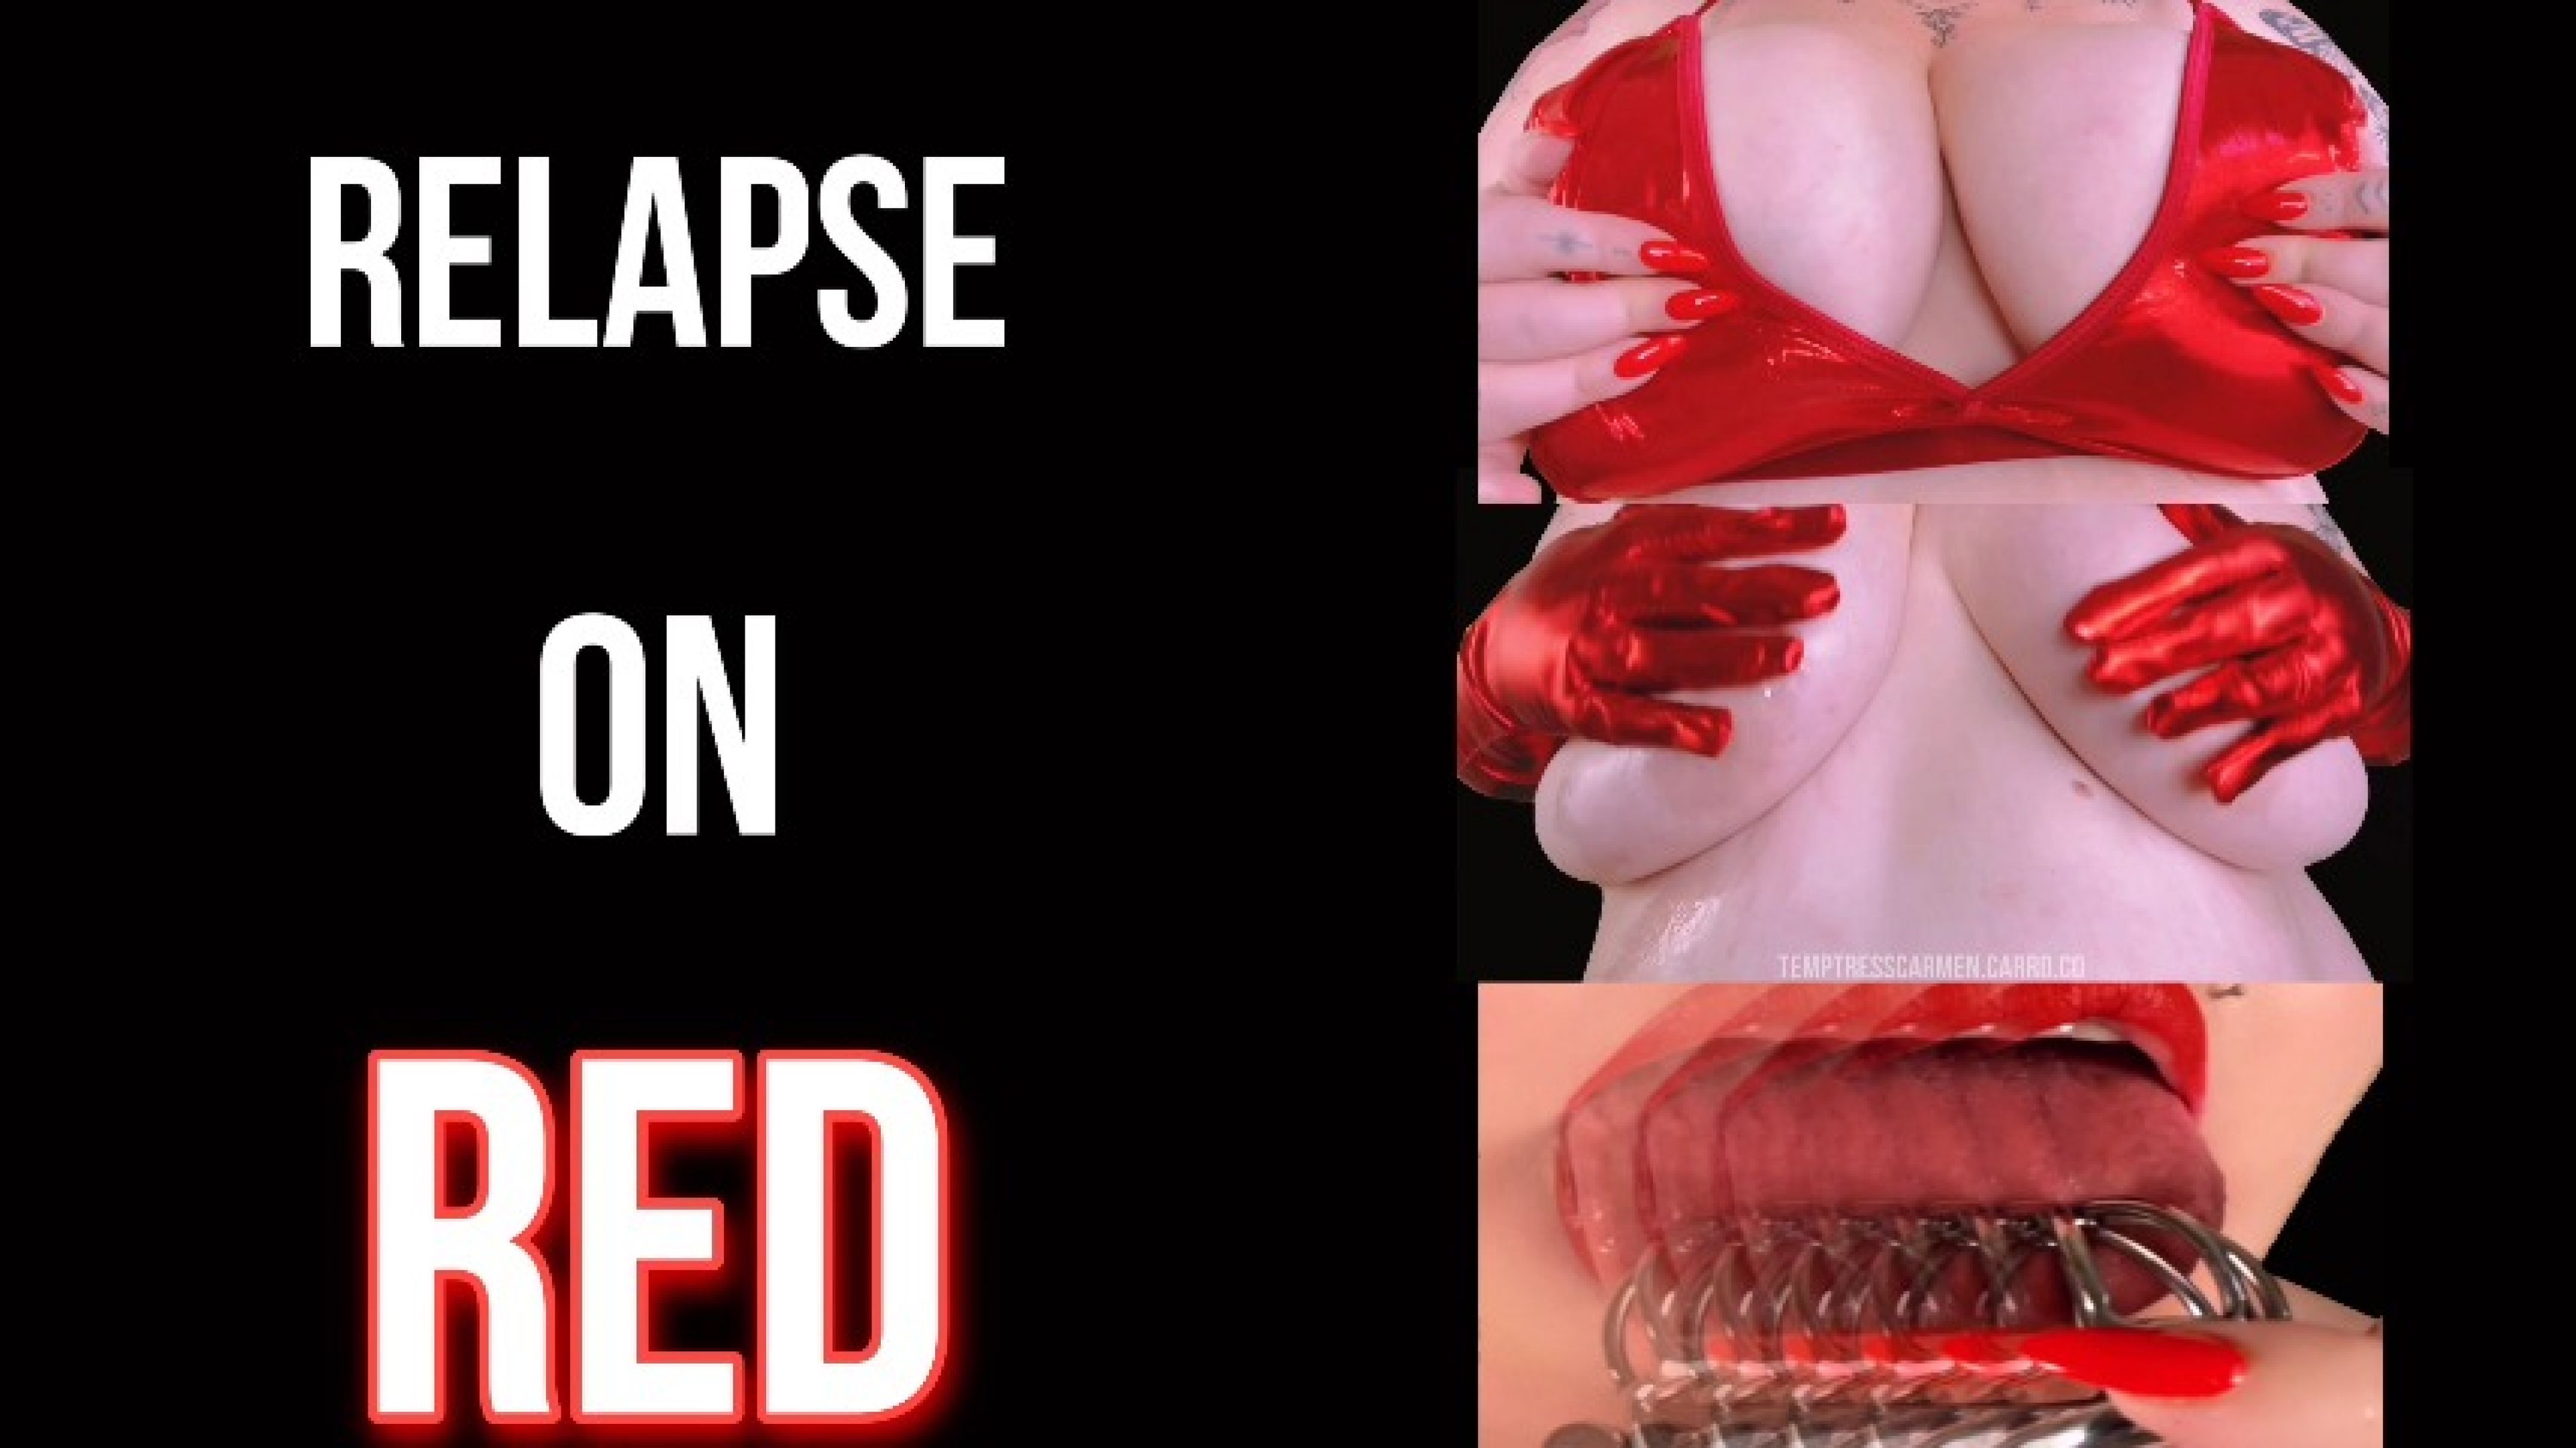 Relapse on Red